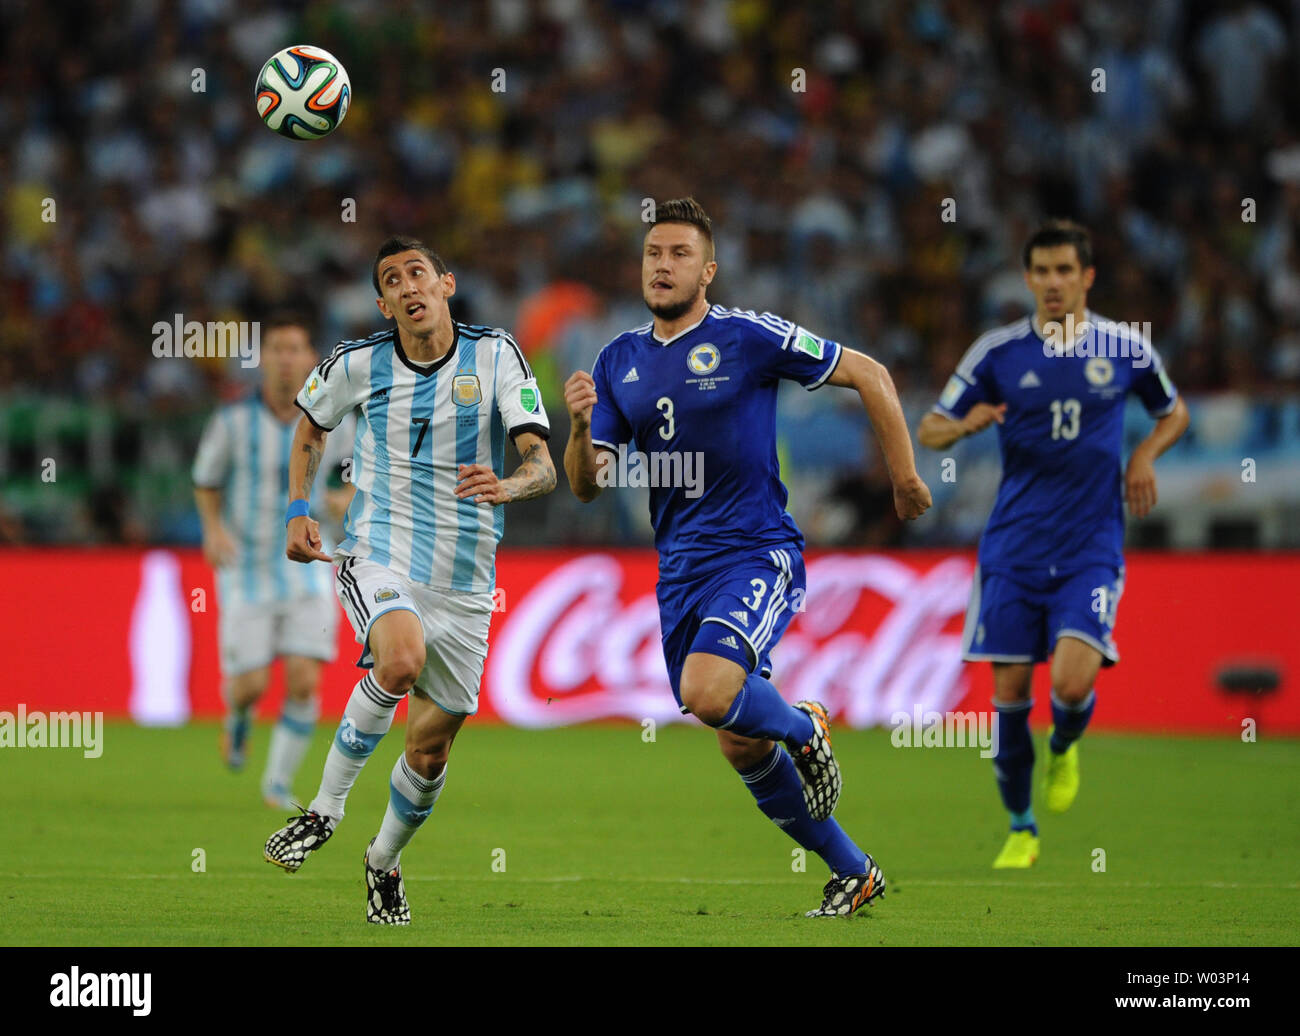 Angel Di Maria (L) of Argentina competes with Ermin Bicakcic of Bosnia Herzegovina during the 2014 FIFA World Cup Group F match at the Estadio do Maracana in Rio de Janeiro, Brazil on June 15, 2014. UPI/Chris Brunskill Stock Photo